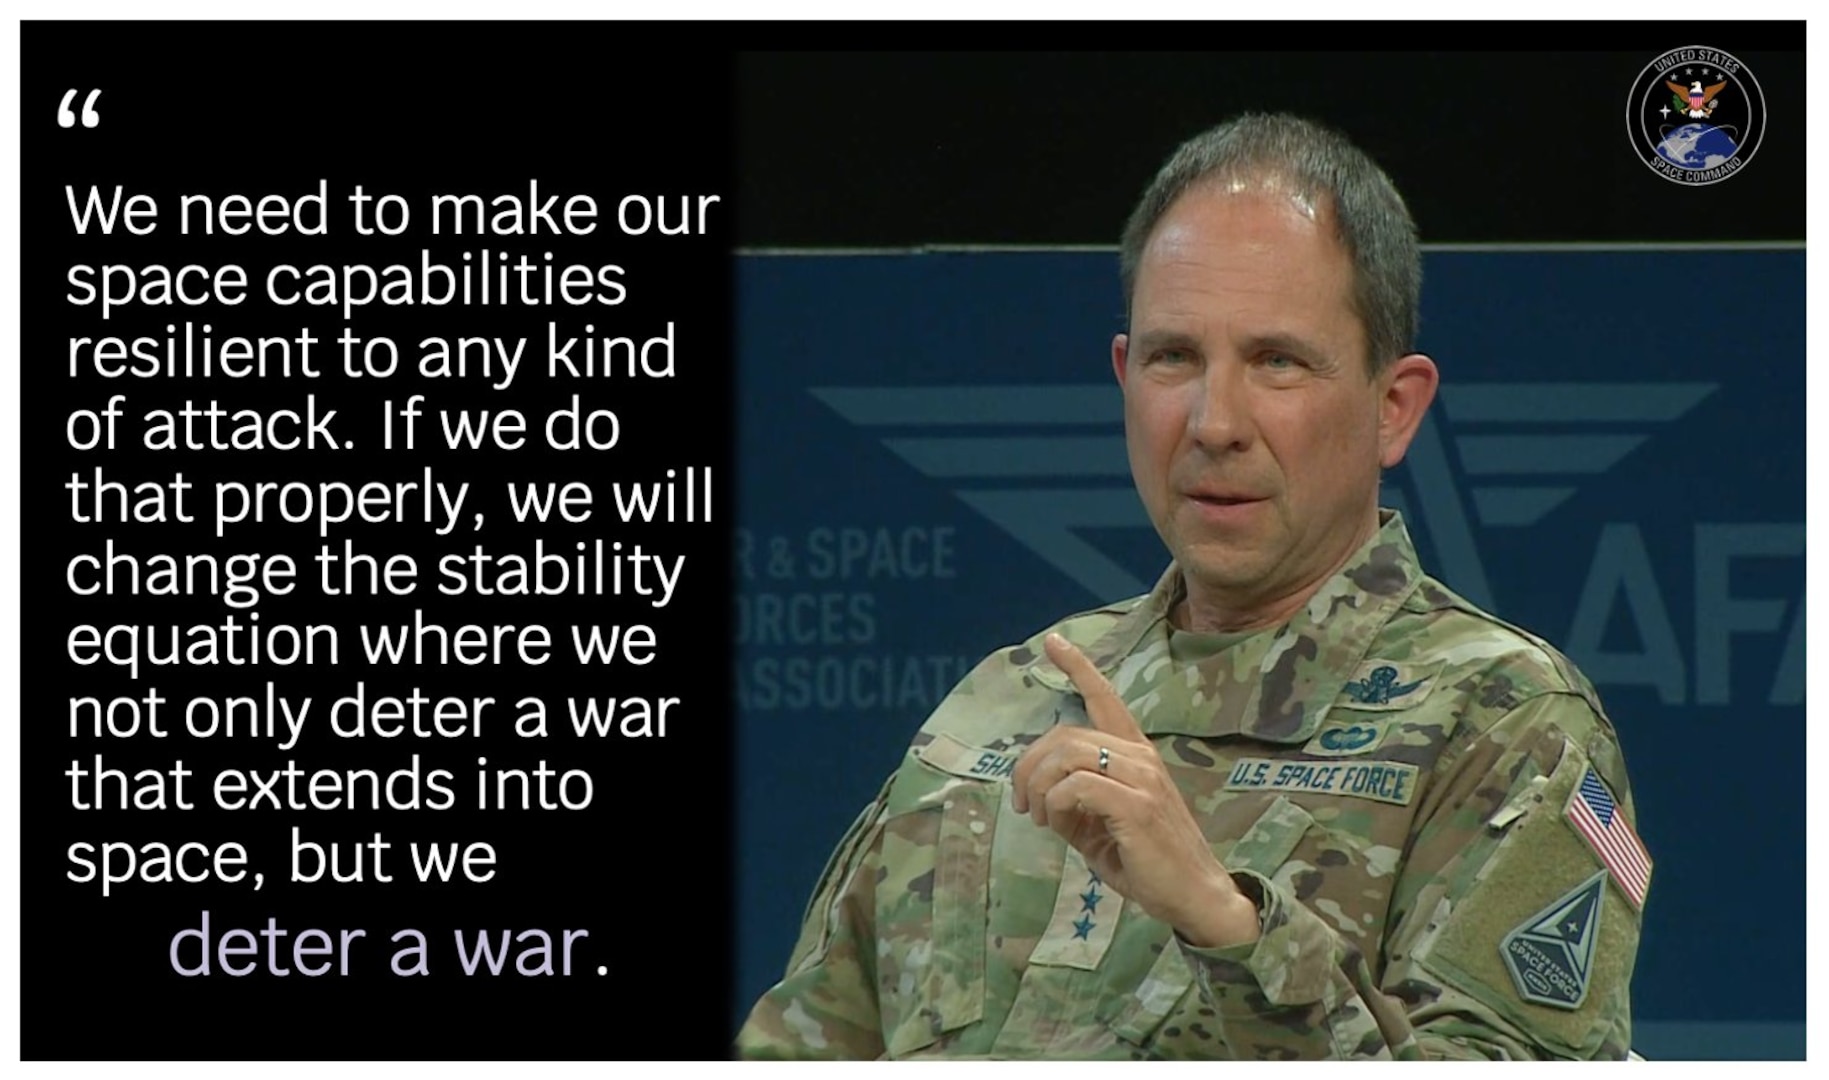 Shaw, VanHerck addressed the need to move fast and modernize for a digital age at the AFA Warfighter conference